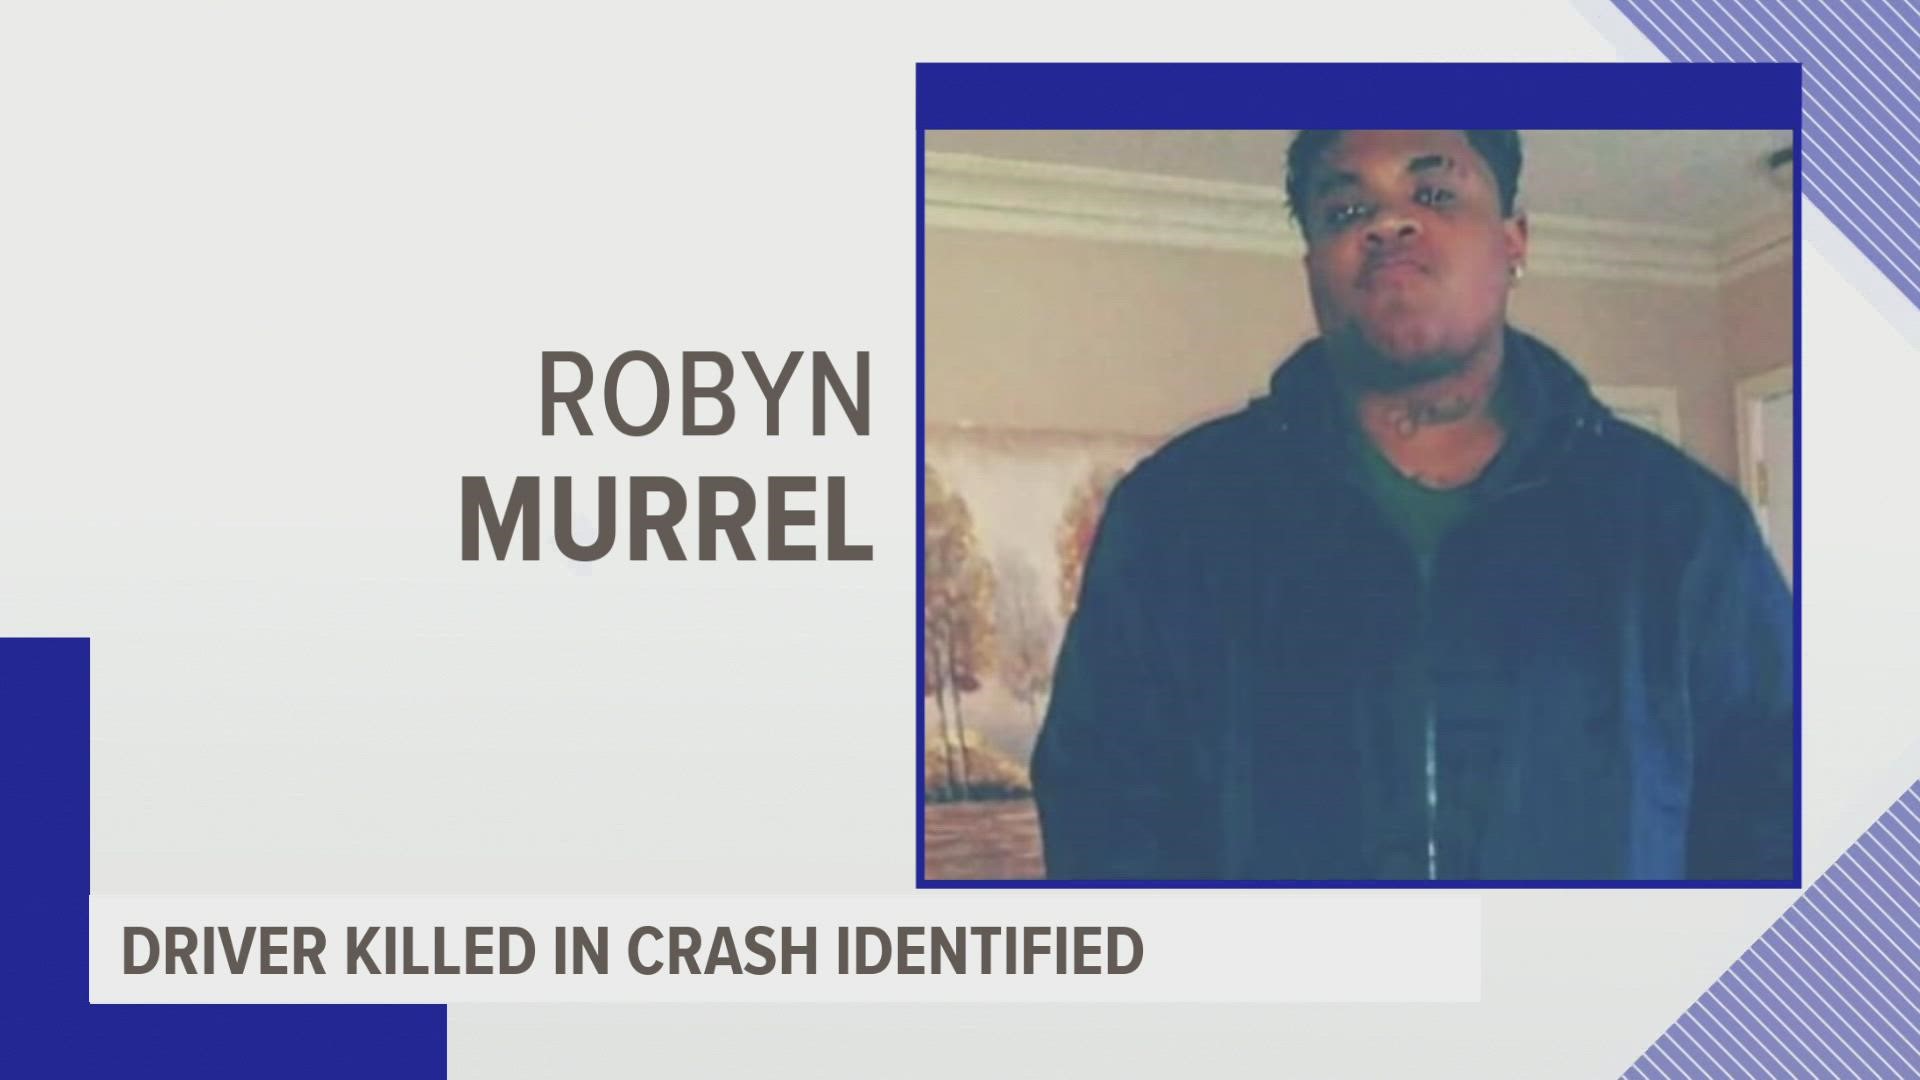 Police identified the person killed as 27-year-old Robyn Danyel Murrel.